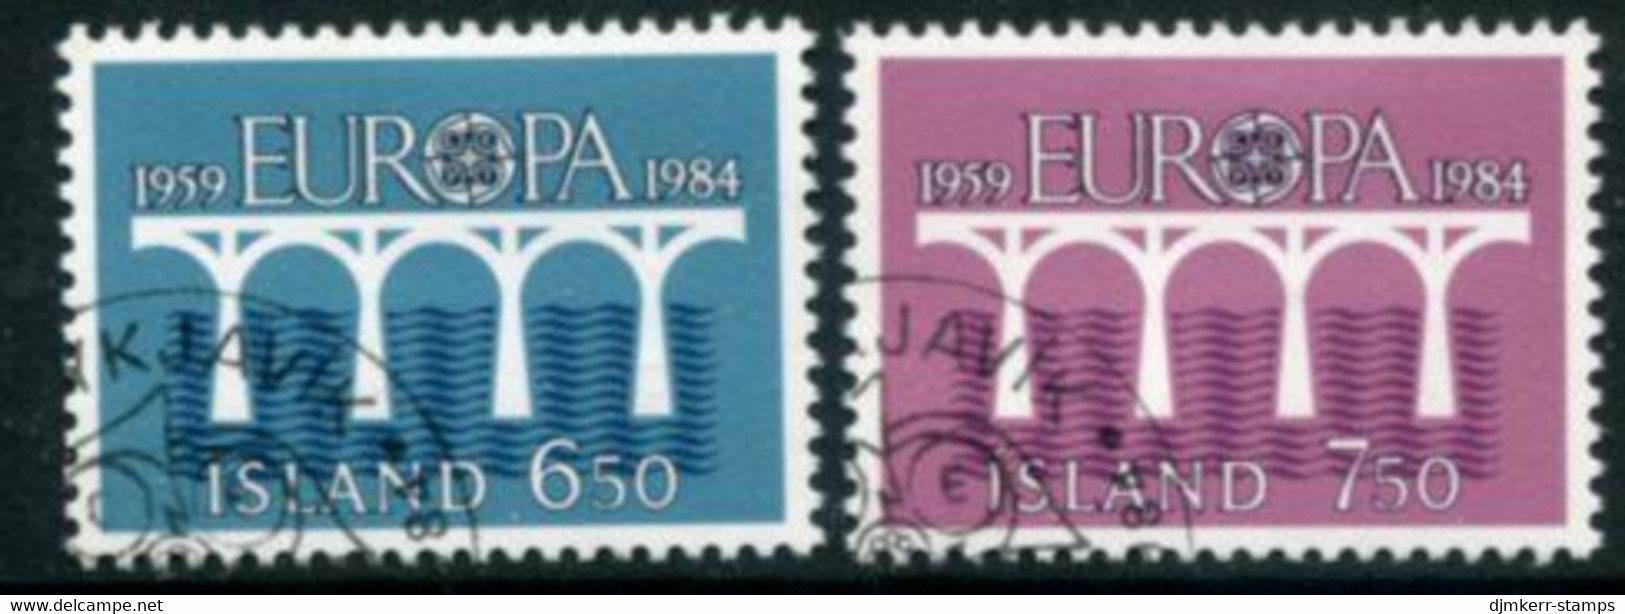 ICELAND 1984  Europa Used.  Michel 614-15 - Used Stamps